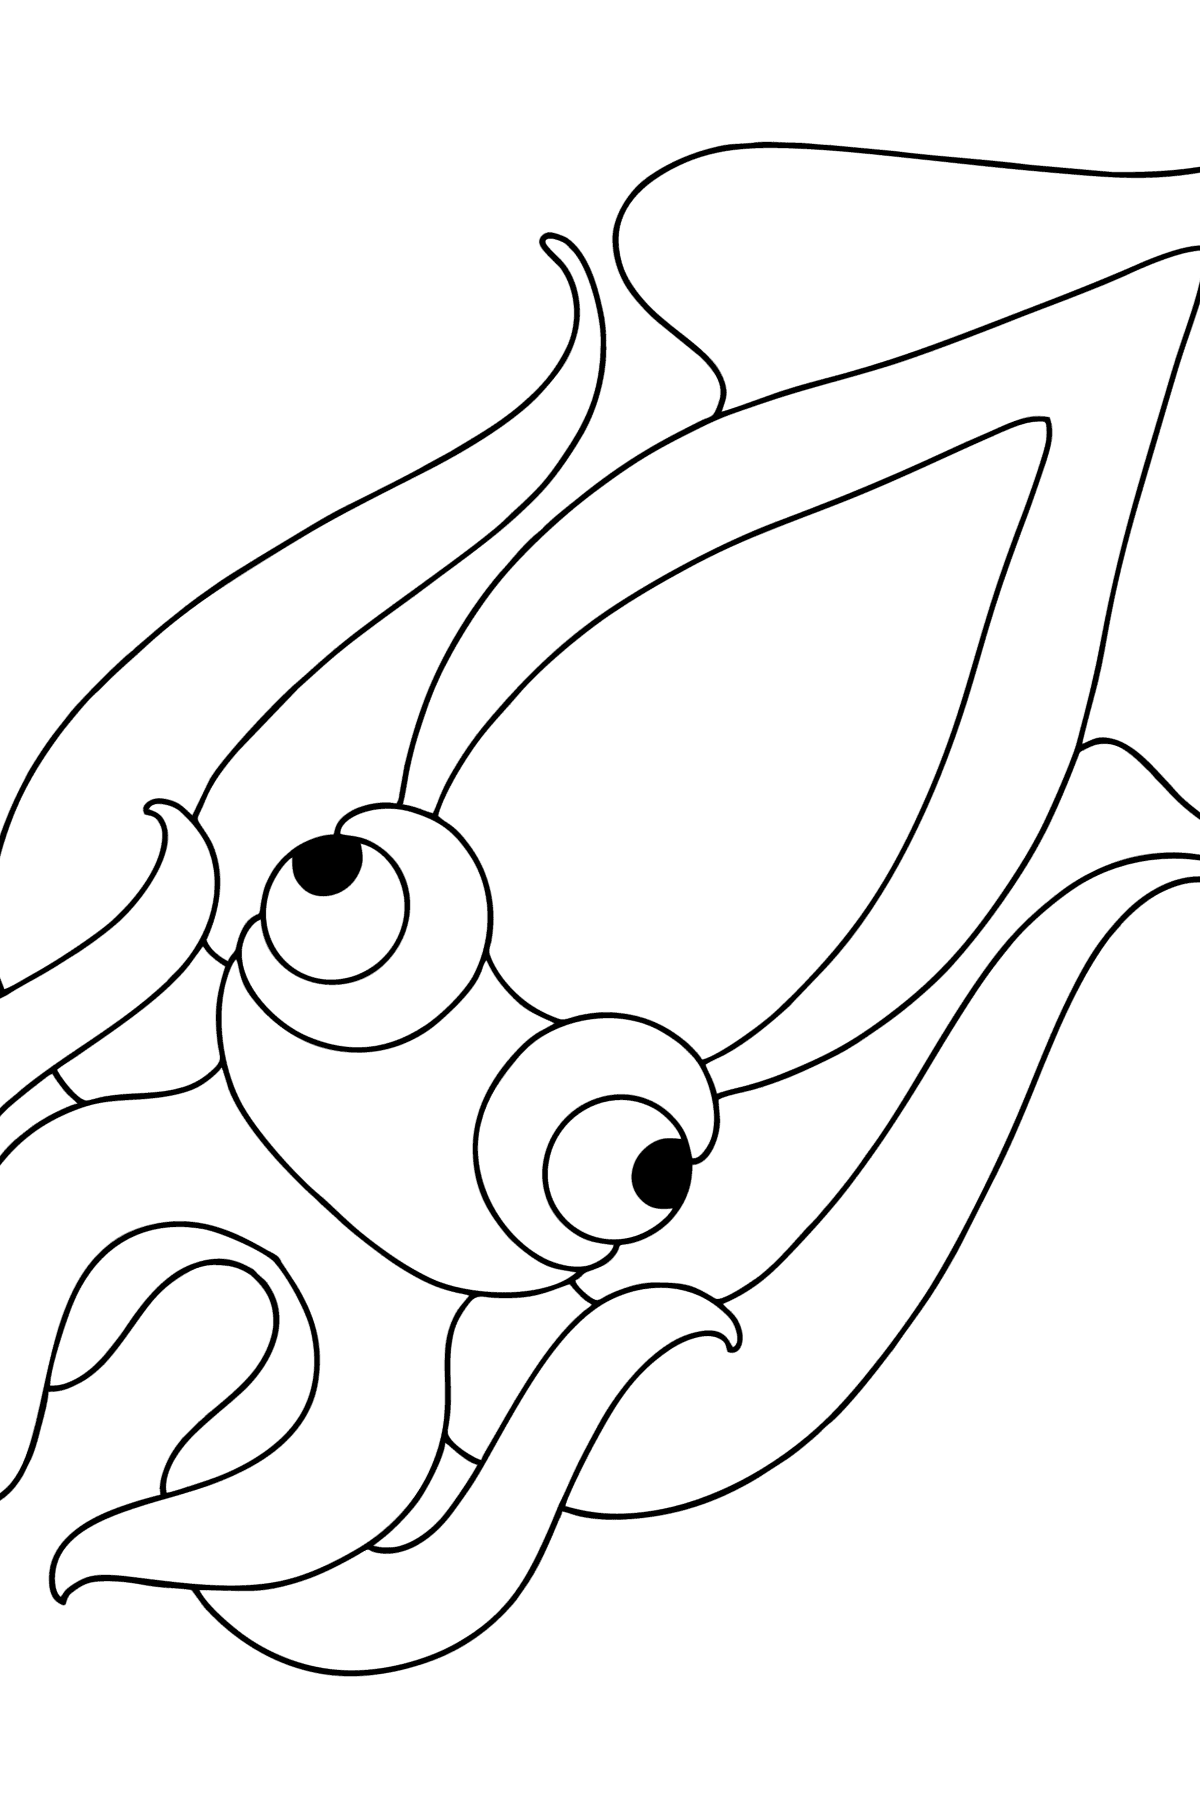 Squid coloring page for Kids ♥ Online and Print for Free